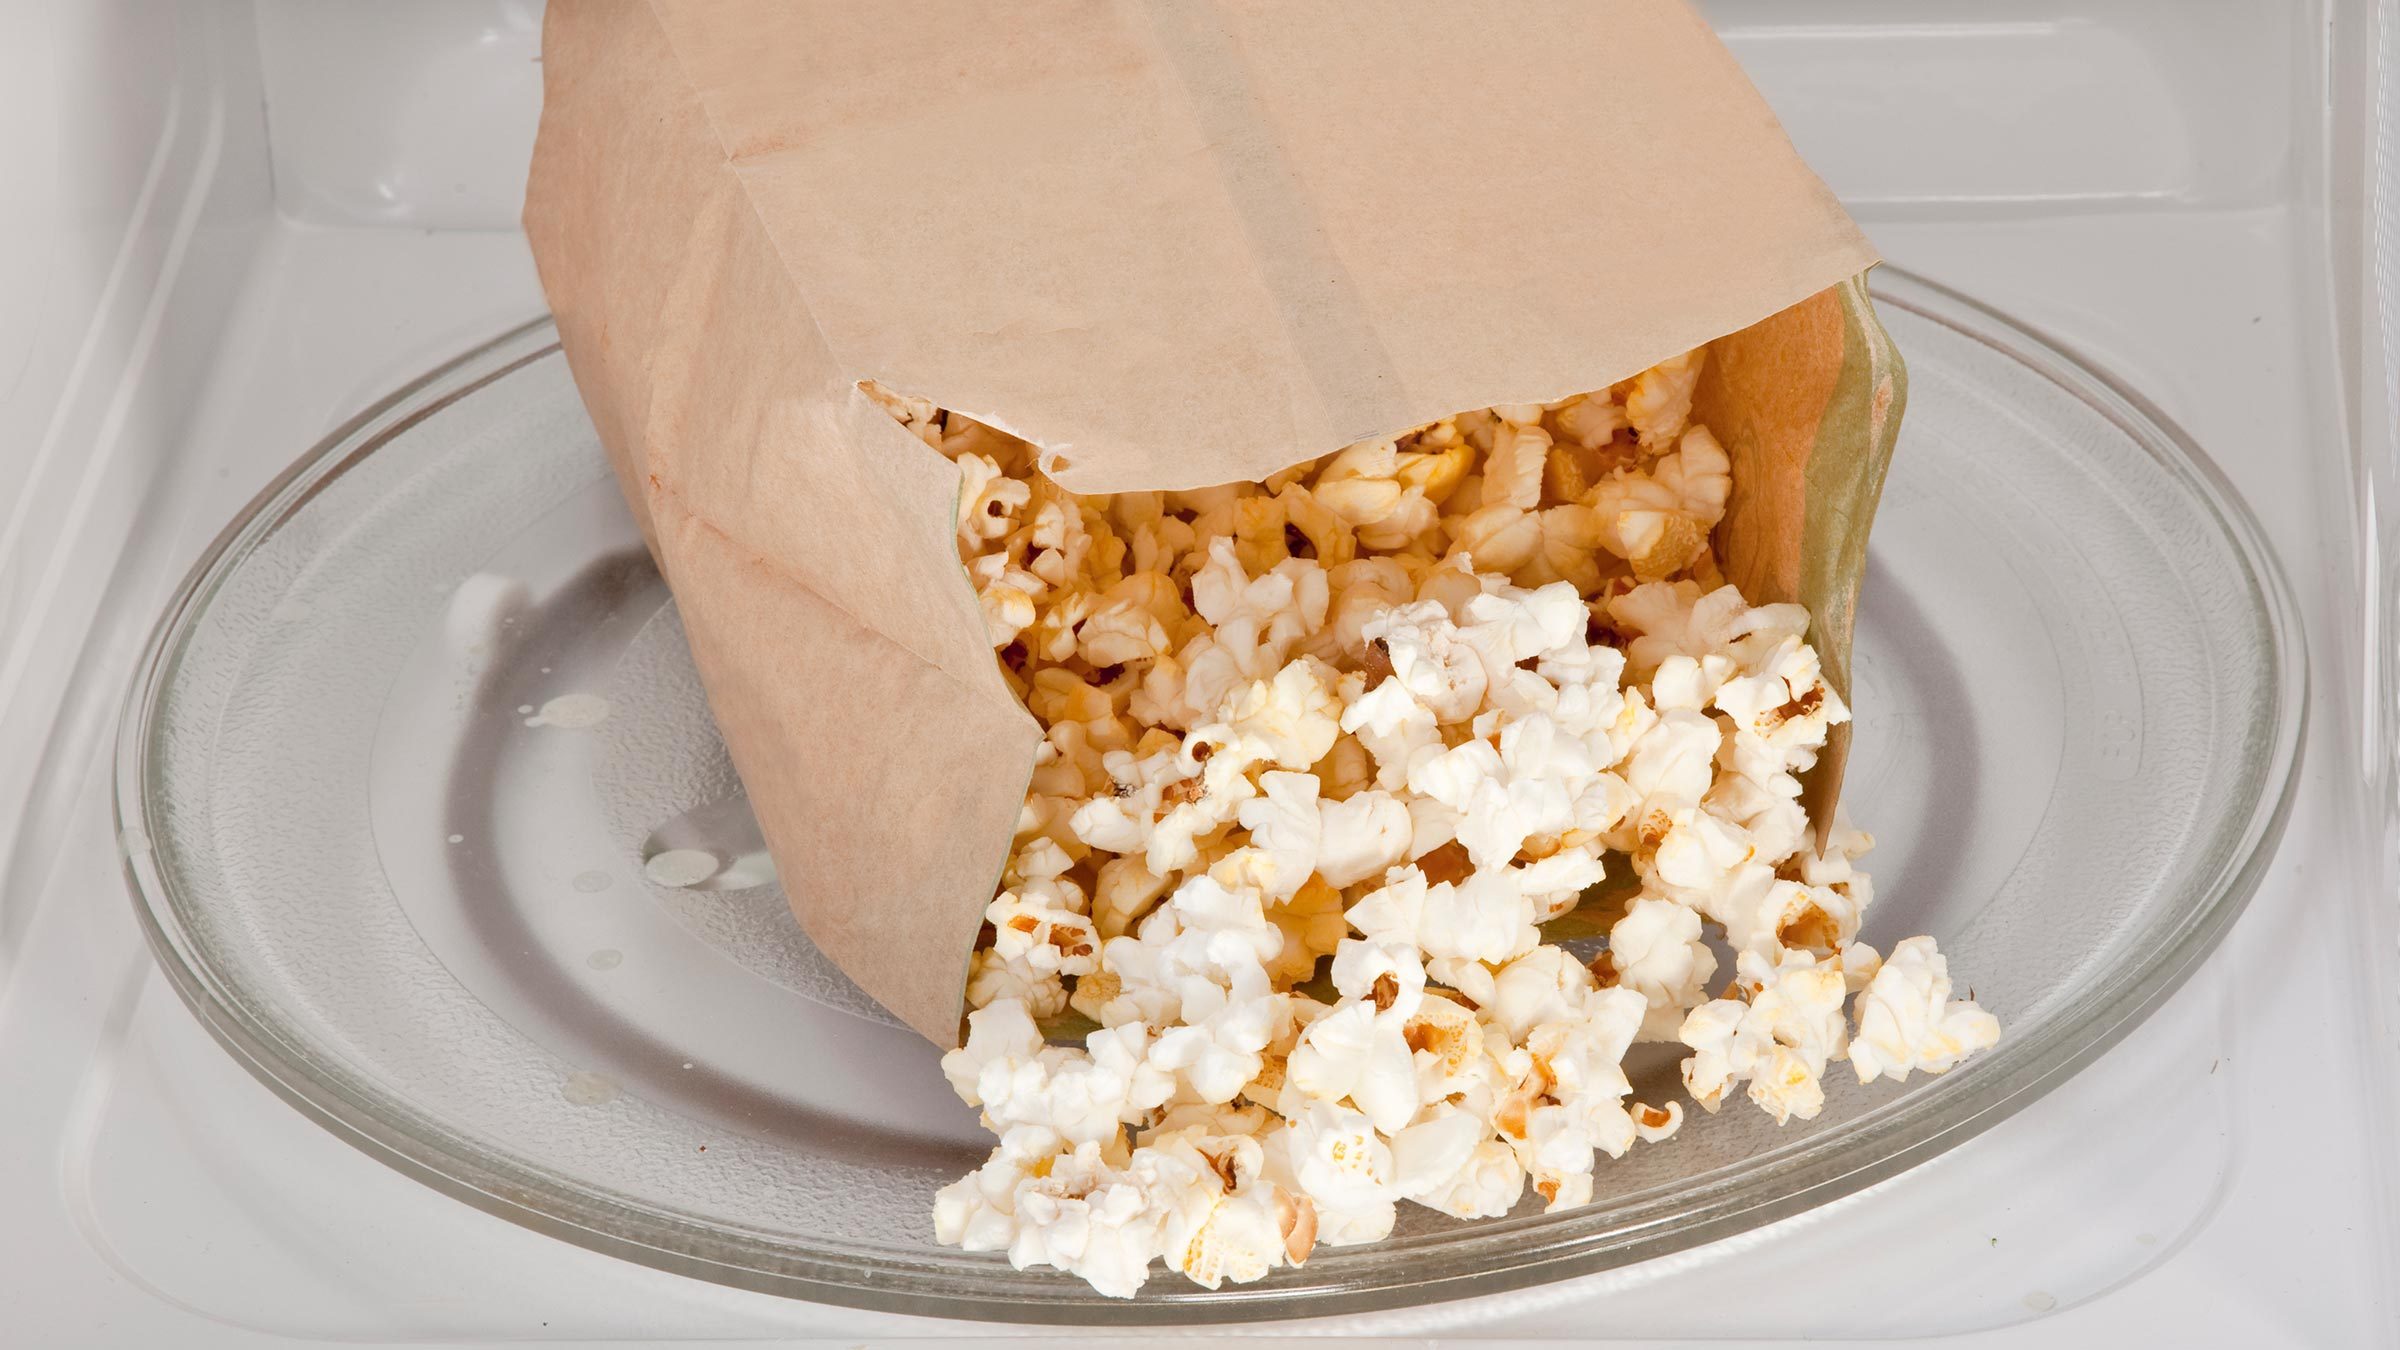 Popcorn cooked in a microwave oven still in the bag.